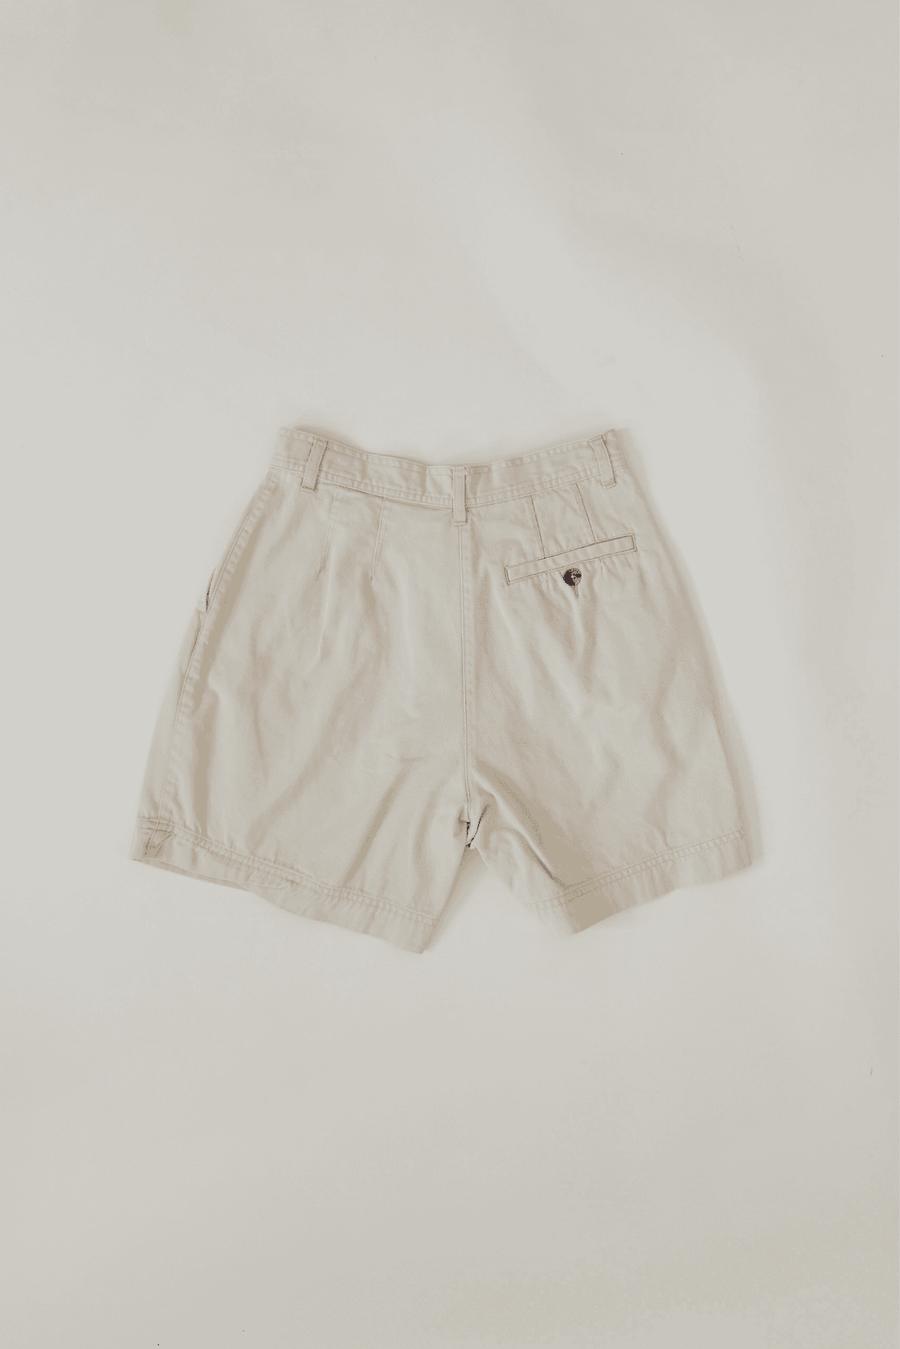 Early 2000s Vintage Charter Club Beige High Waist Shorts Size 6P